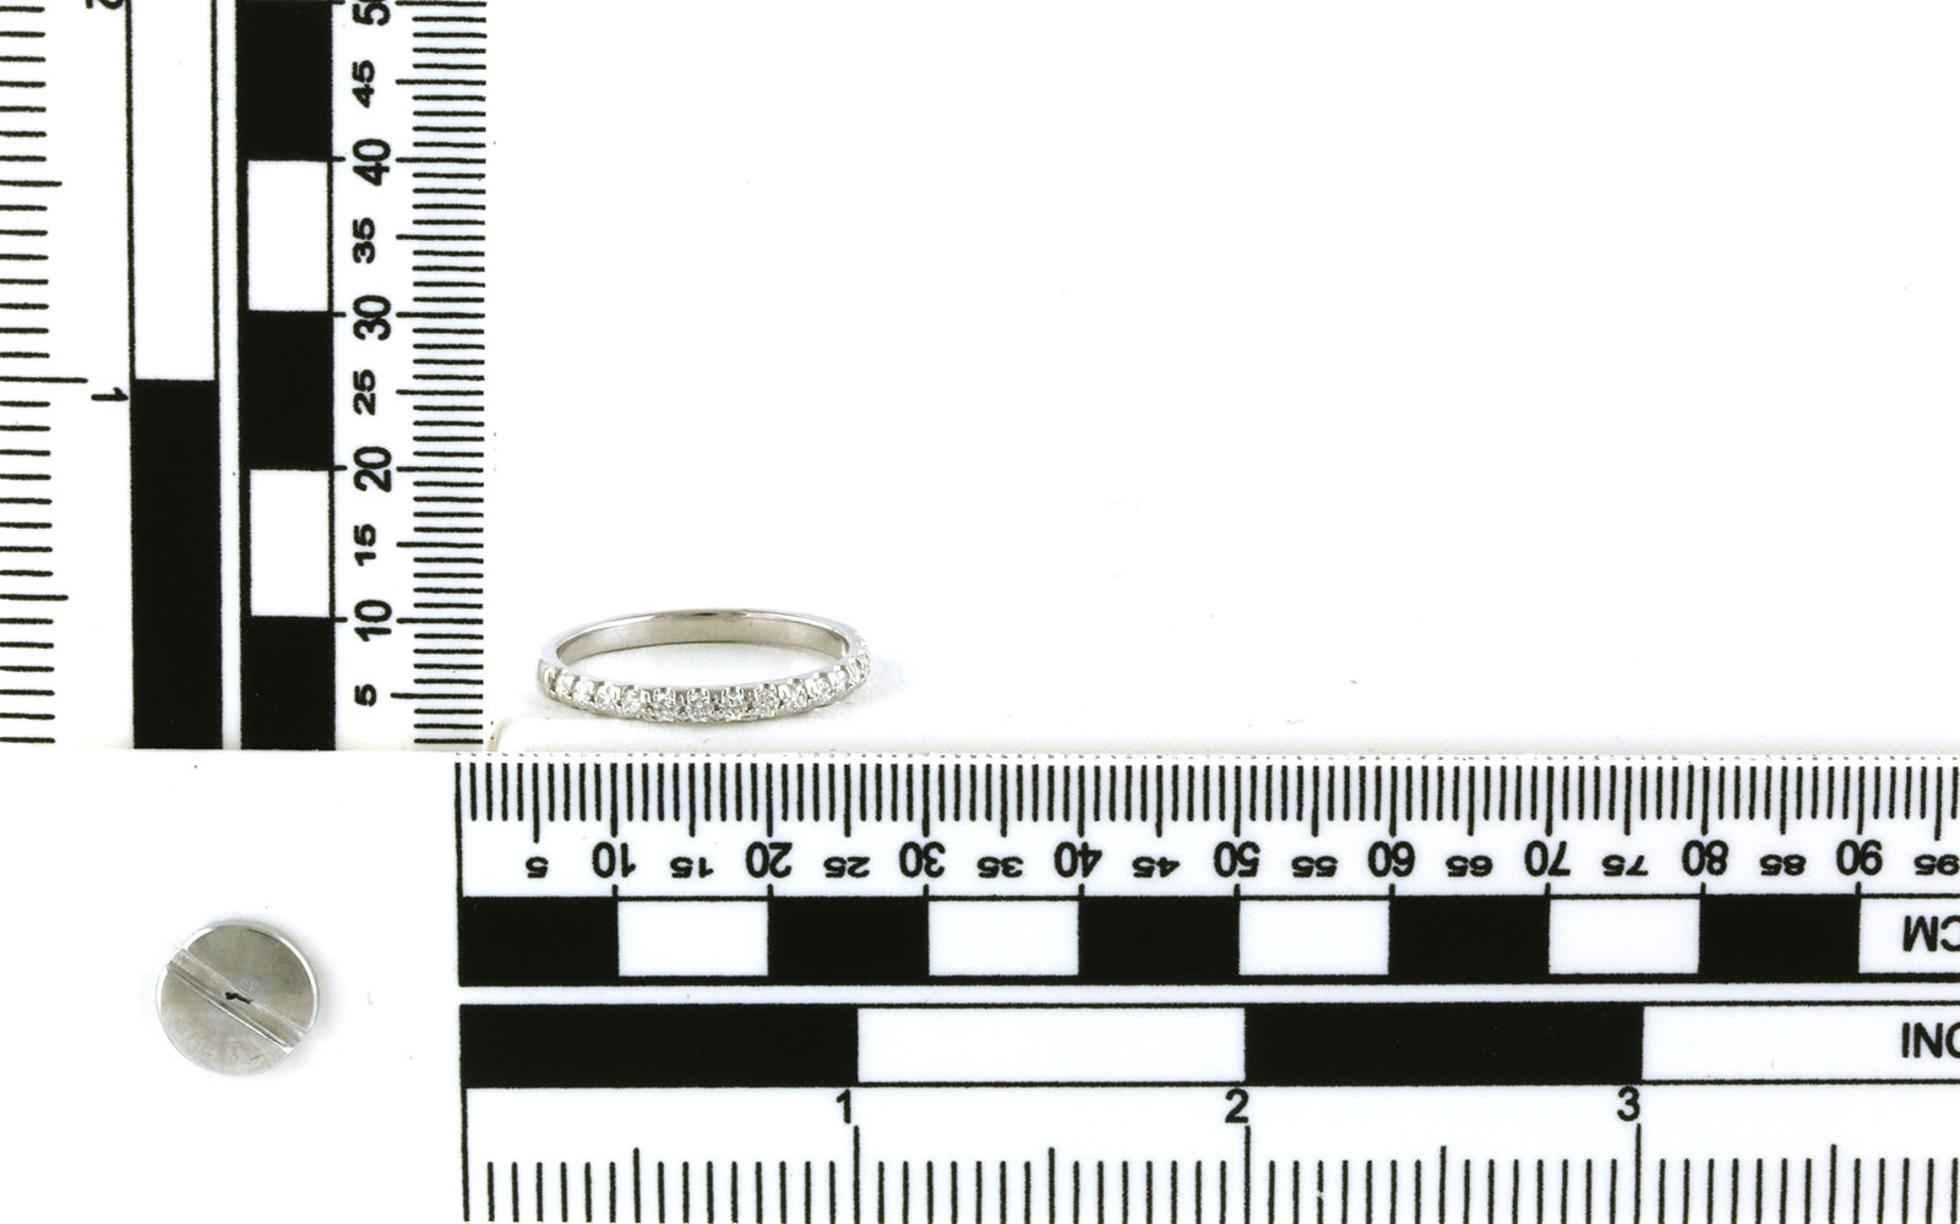 Estate Piece: 15-Stone Bead-set Wedding Band in White Gold (0.30cts TWT) scale